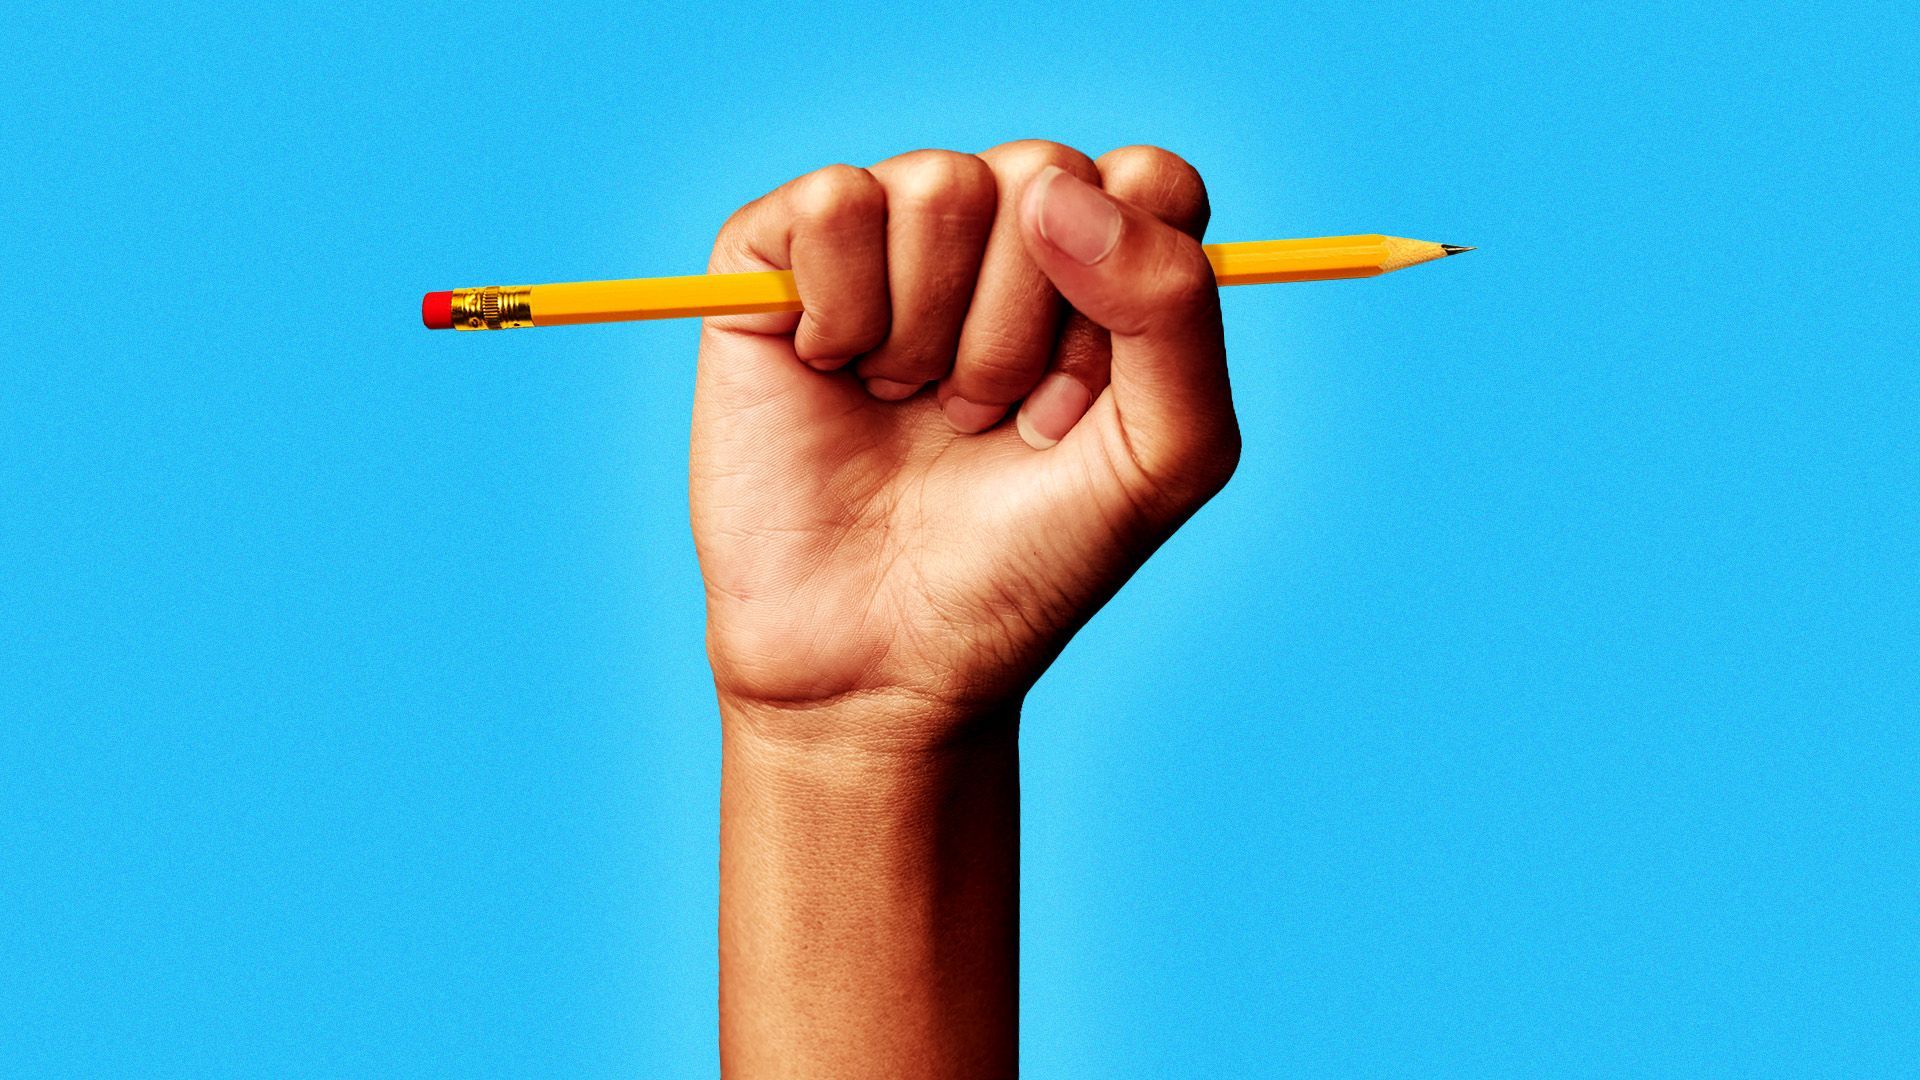 Illustration of a fist holding a pencil.